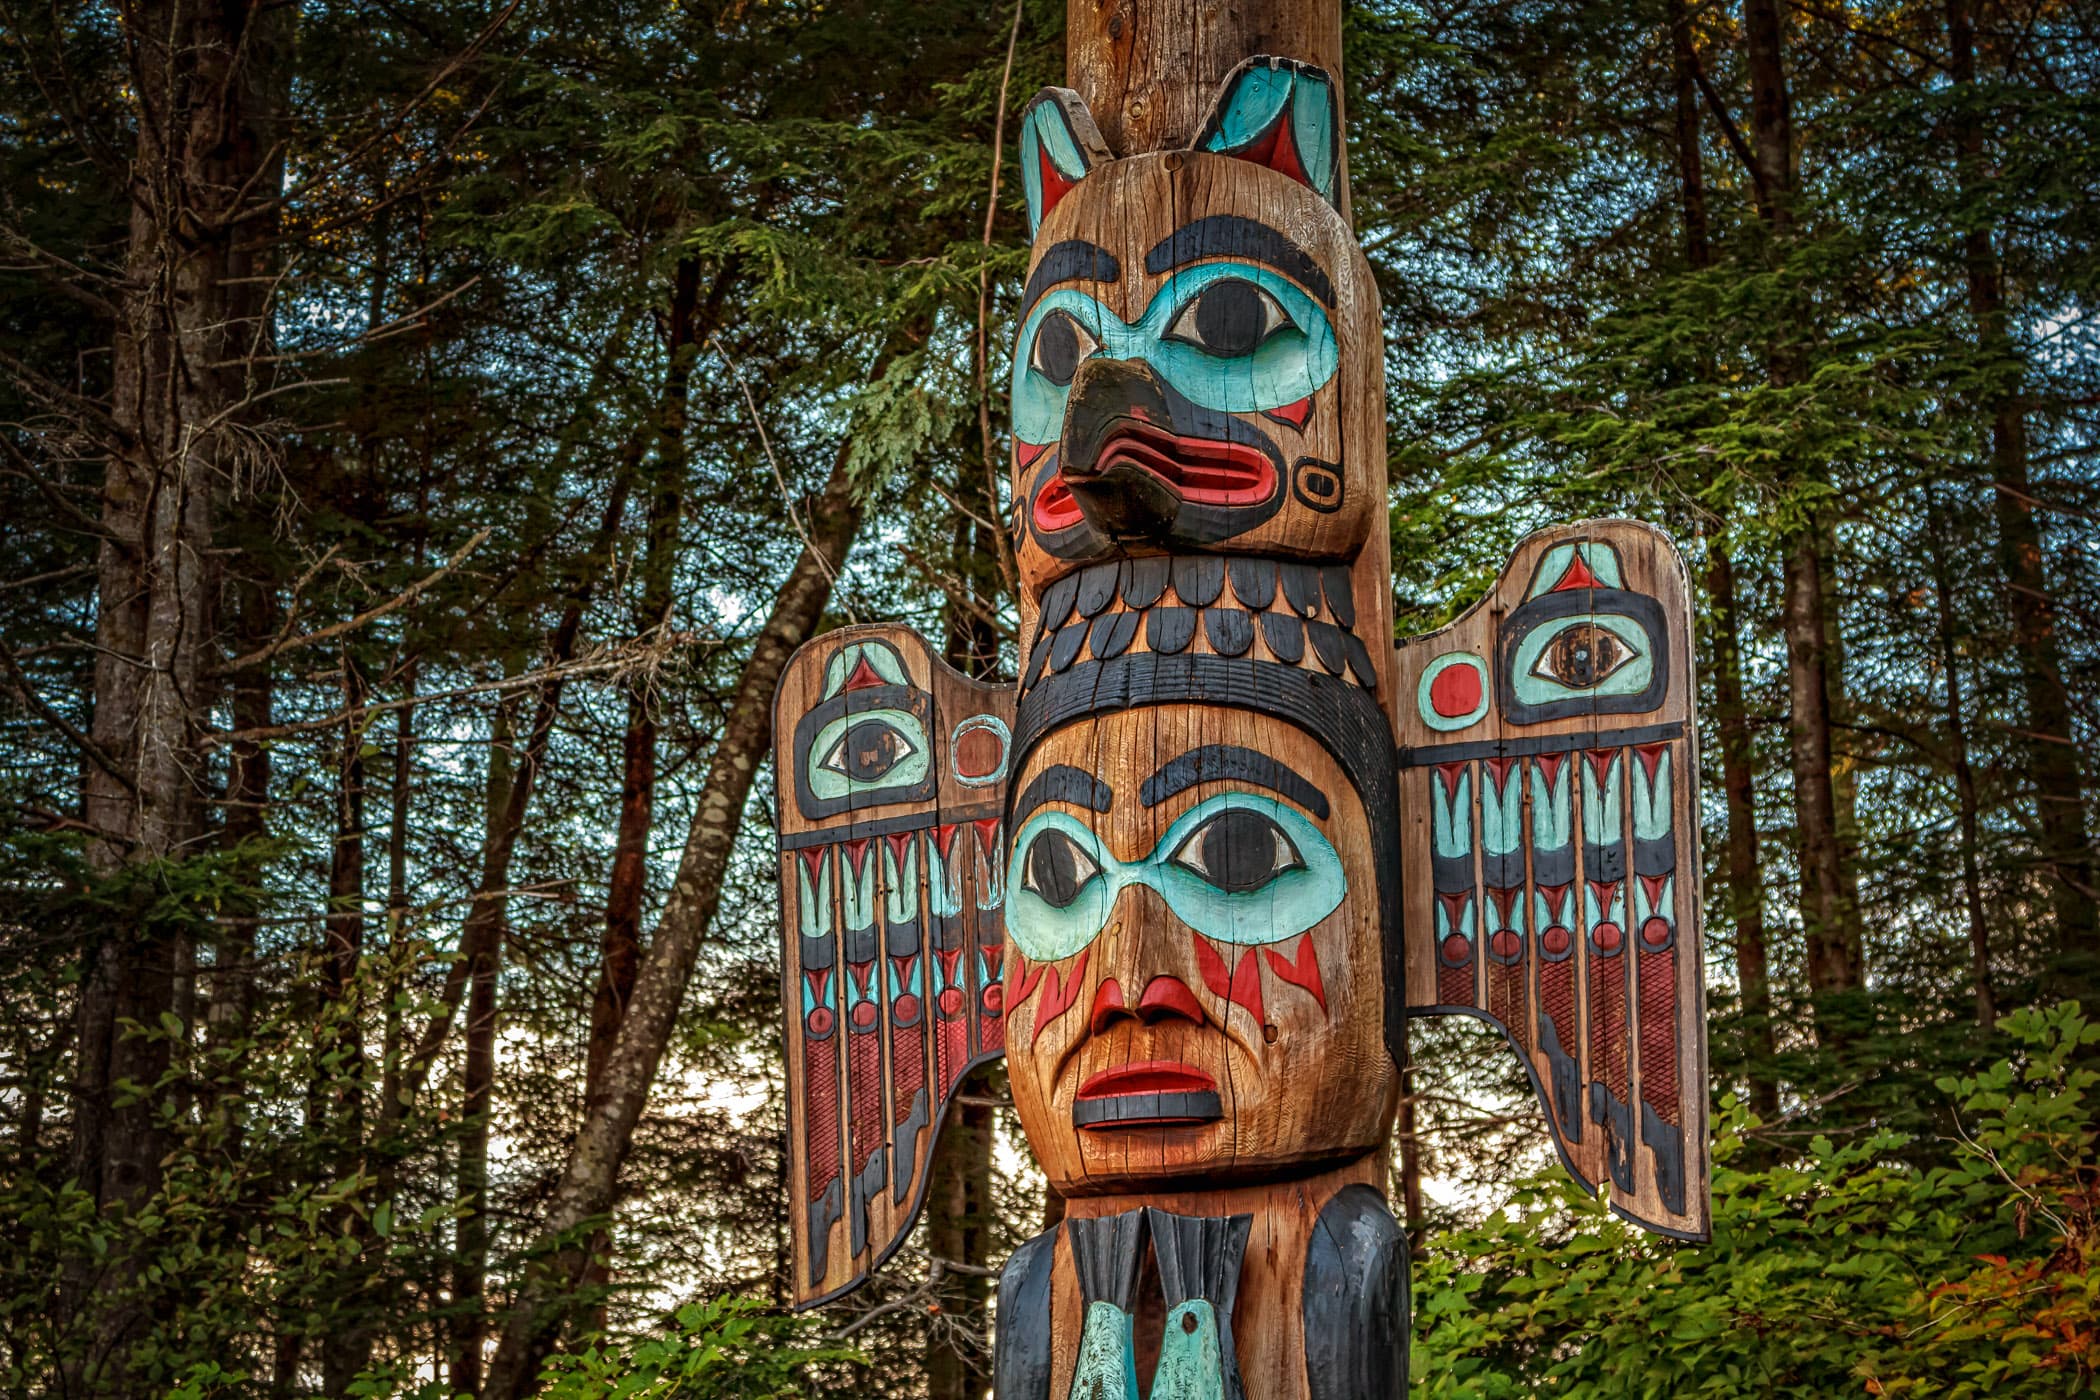 The Kadjuk Bird Pole at Ketchikan, Alaska's Totem Bight State Park depicts Raven forming the headdress of his wife, the Fog Woman, as she holds two salmon.